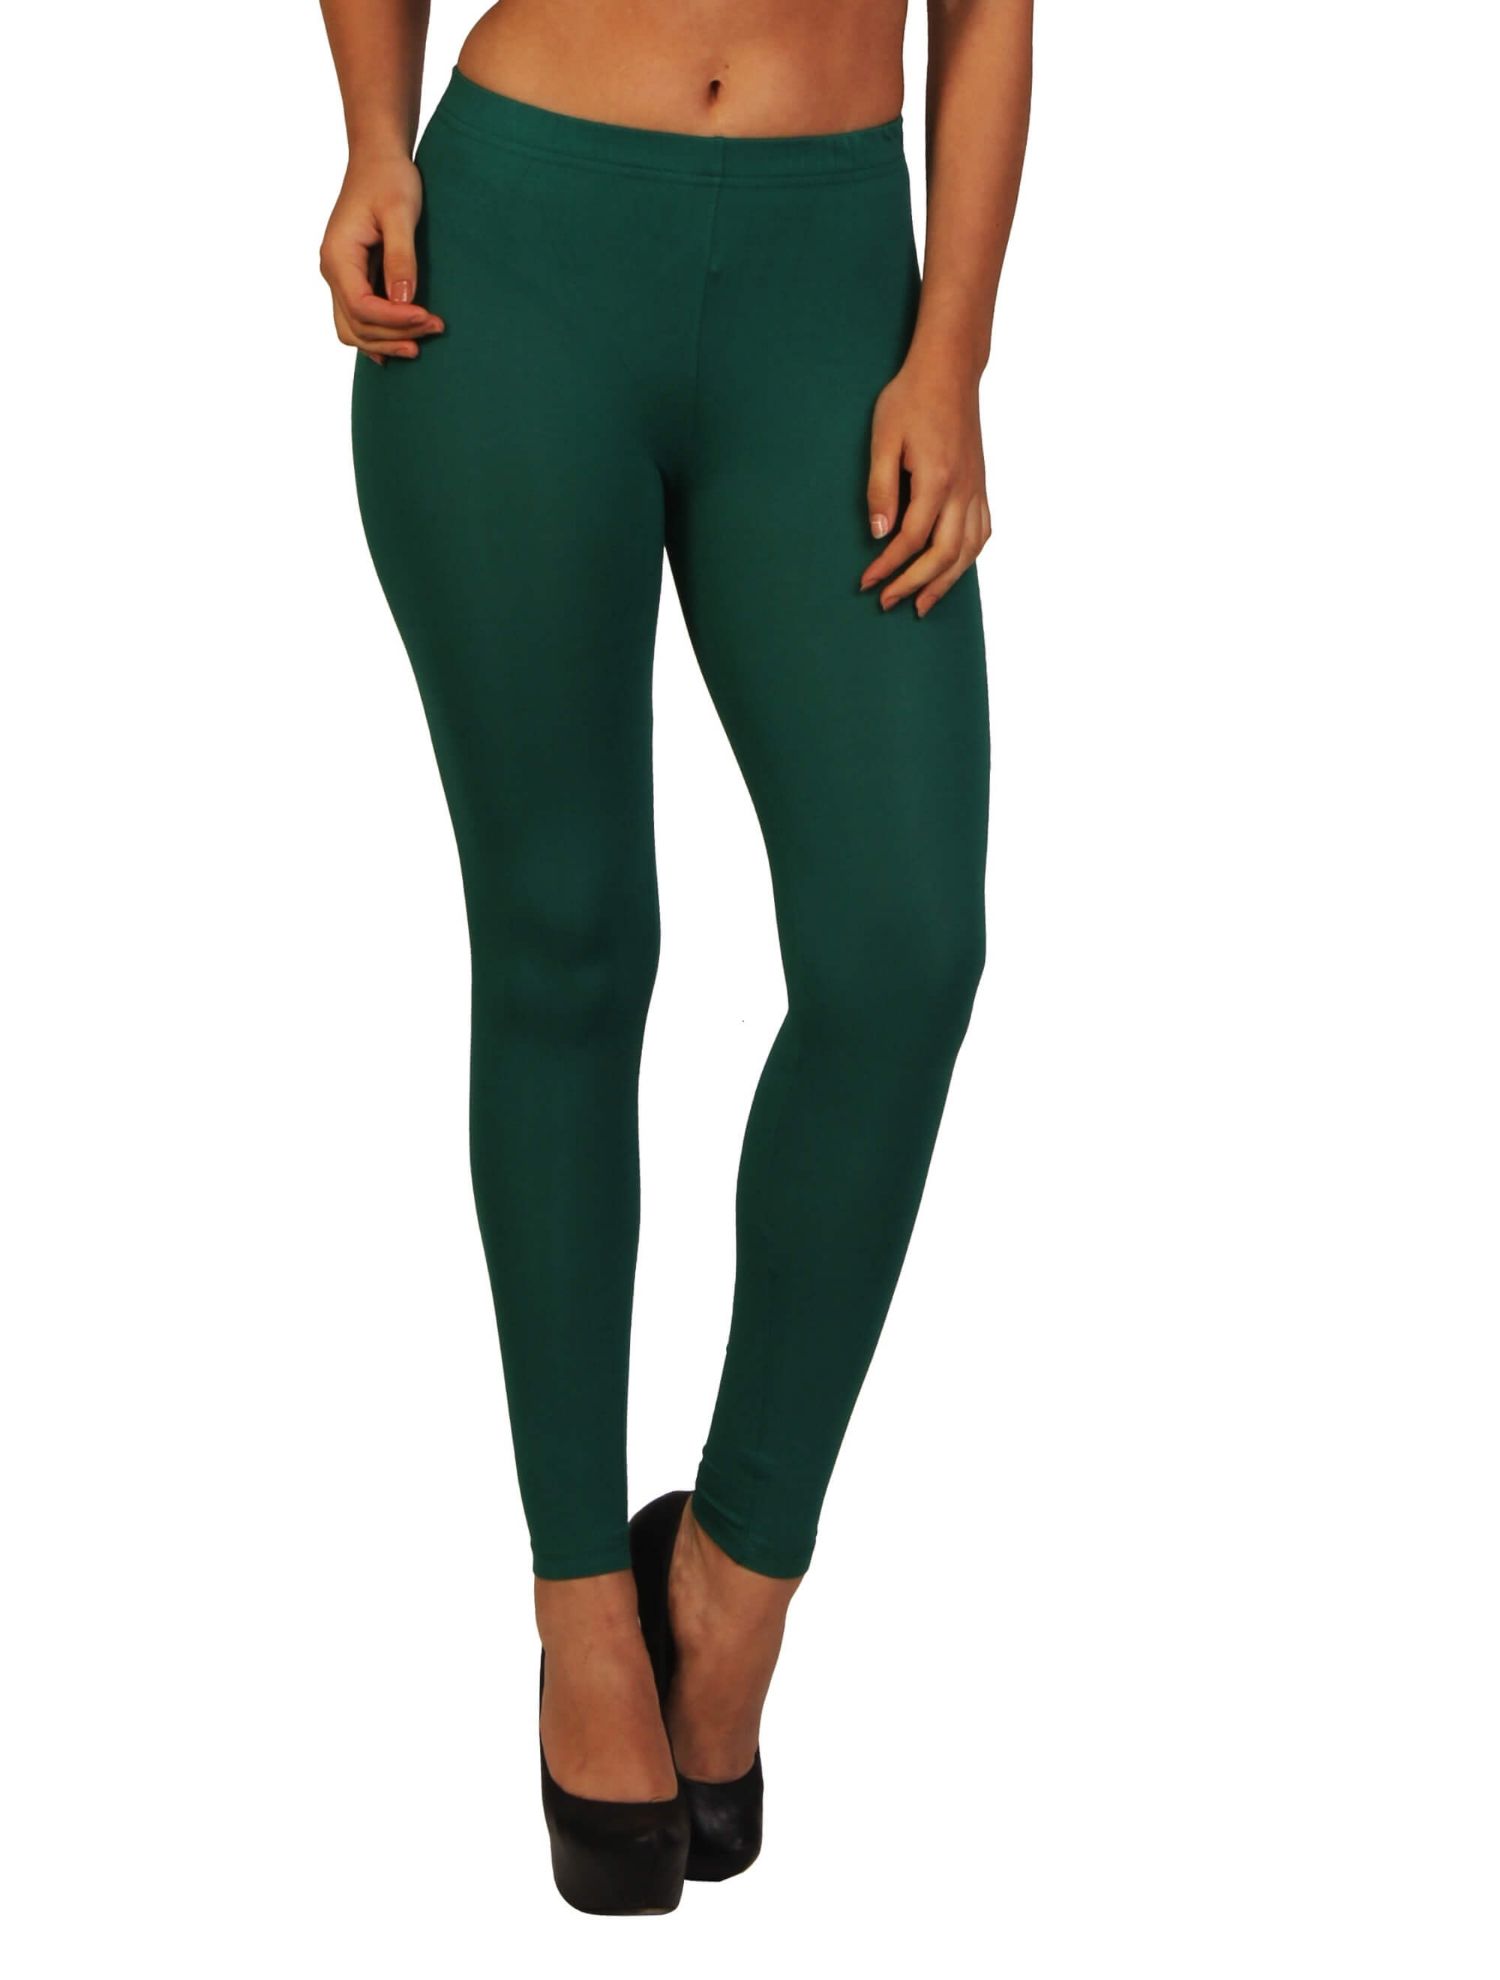 https://frenchtrendz.com/images/thumbs/0000460_frenchtrendz-viscose-spandex-dark-green-ankle-leggings.jpeg